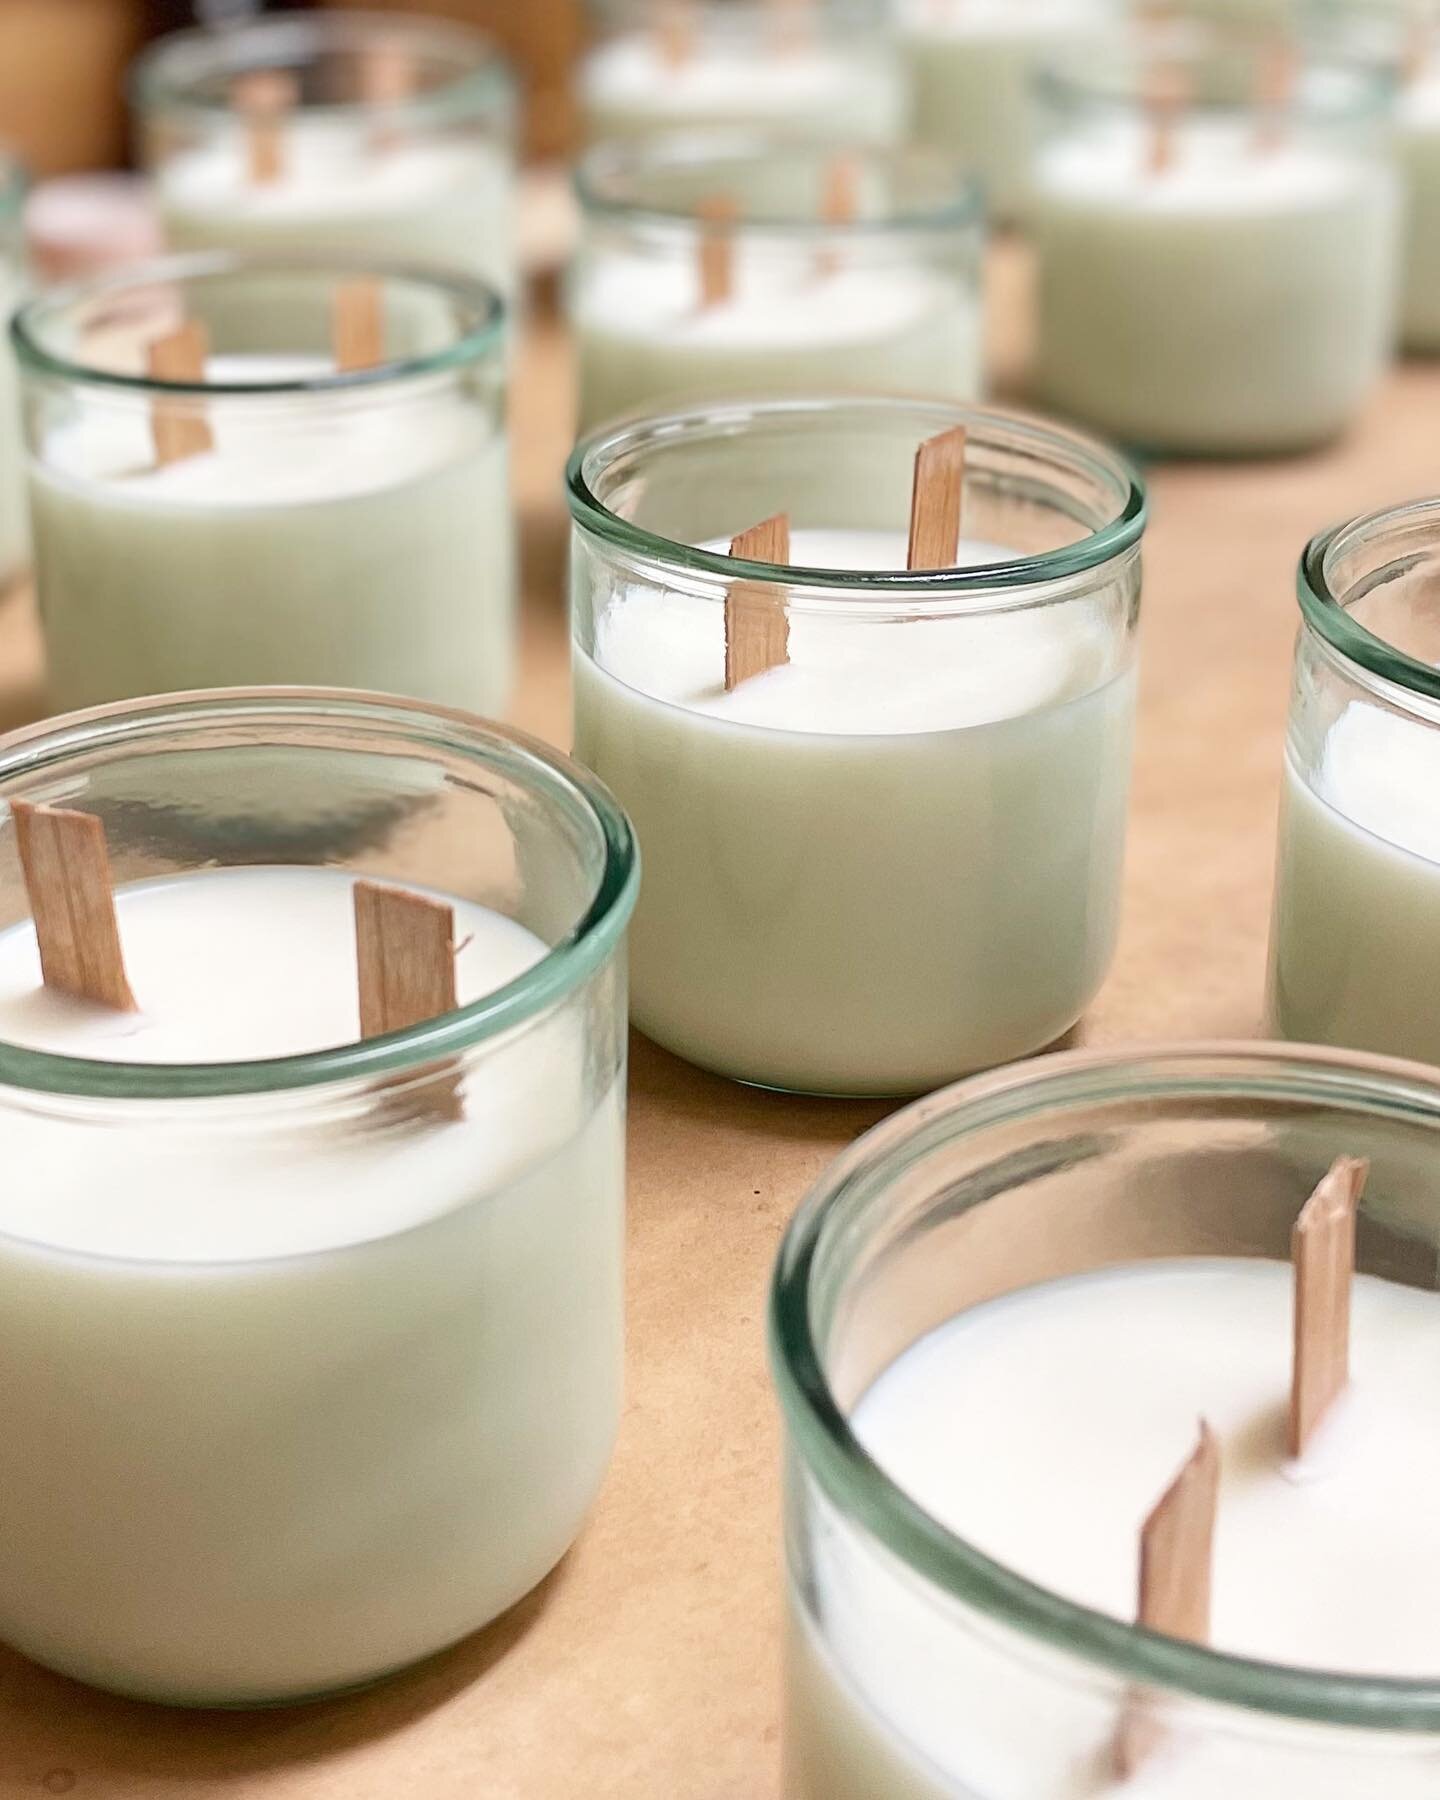 Close up on Naturel Collection in production featuring soy wax, pale green 100% recycled glass vessel, and wood wicks before they are cut😍🌿
.
.
.
#luxandalder #soycandles #candles #homedecor #lovecandles #aromatherapy #candletherapy #fragrance #hom